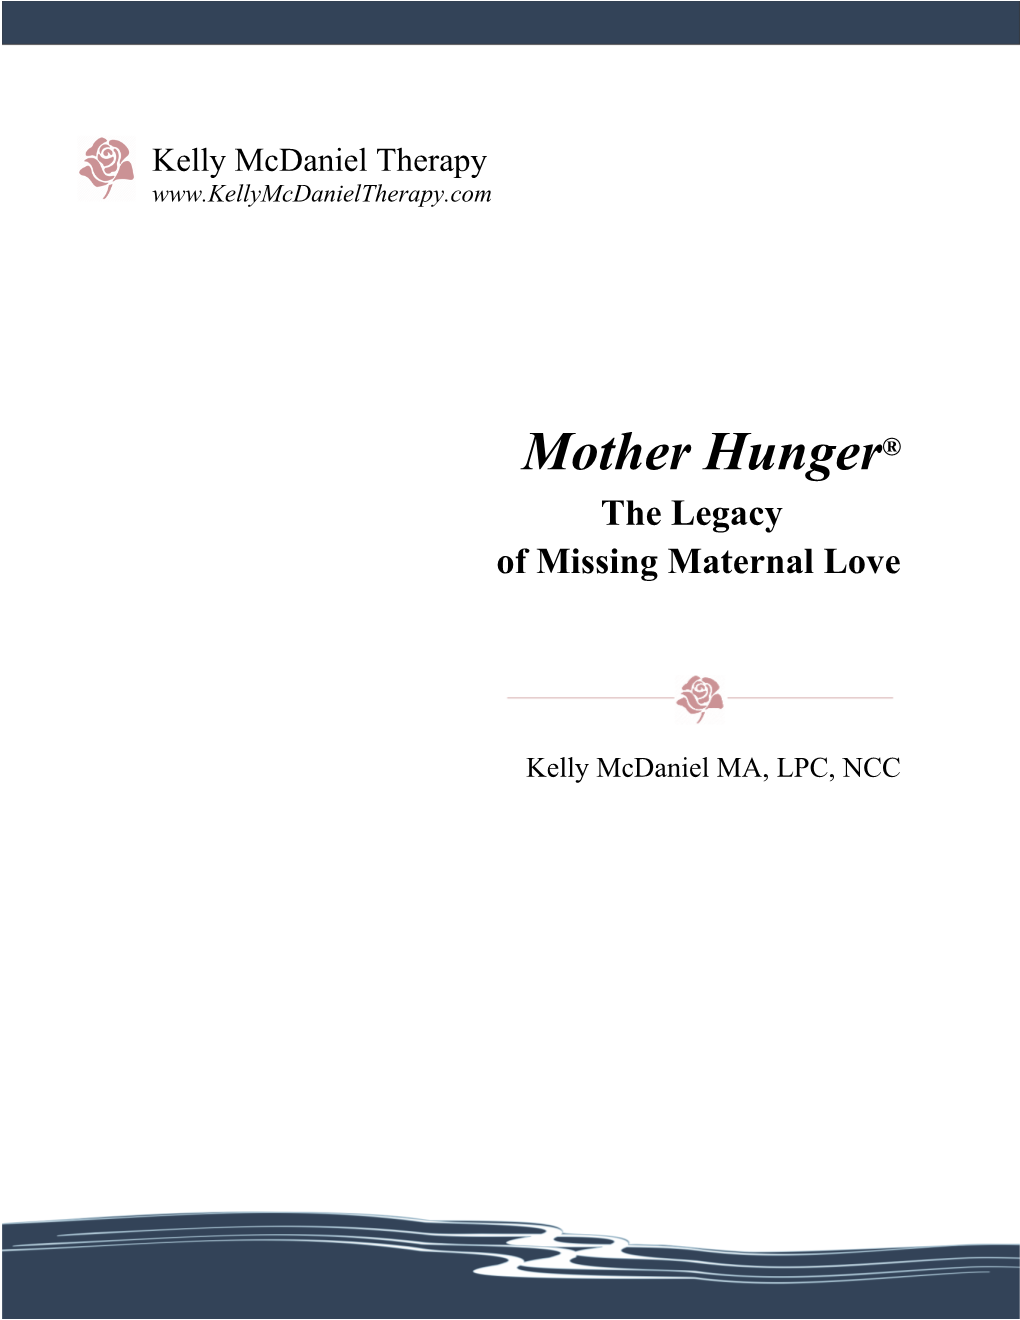 Mother Hunger® the Legacy of Missing Maternal Love